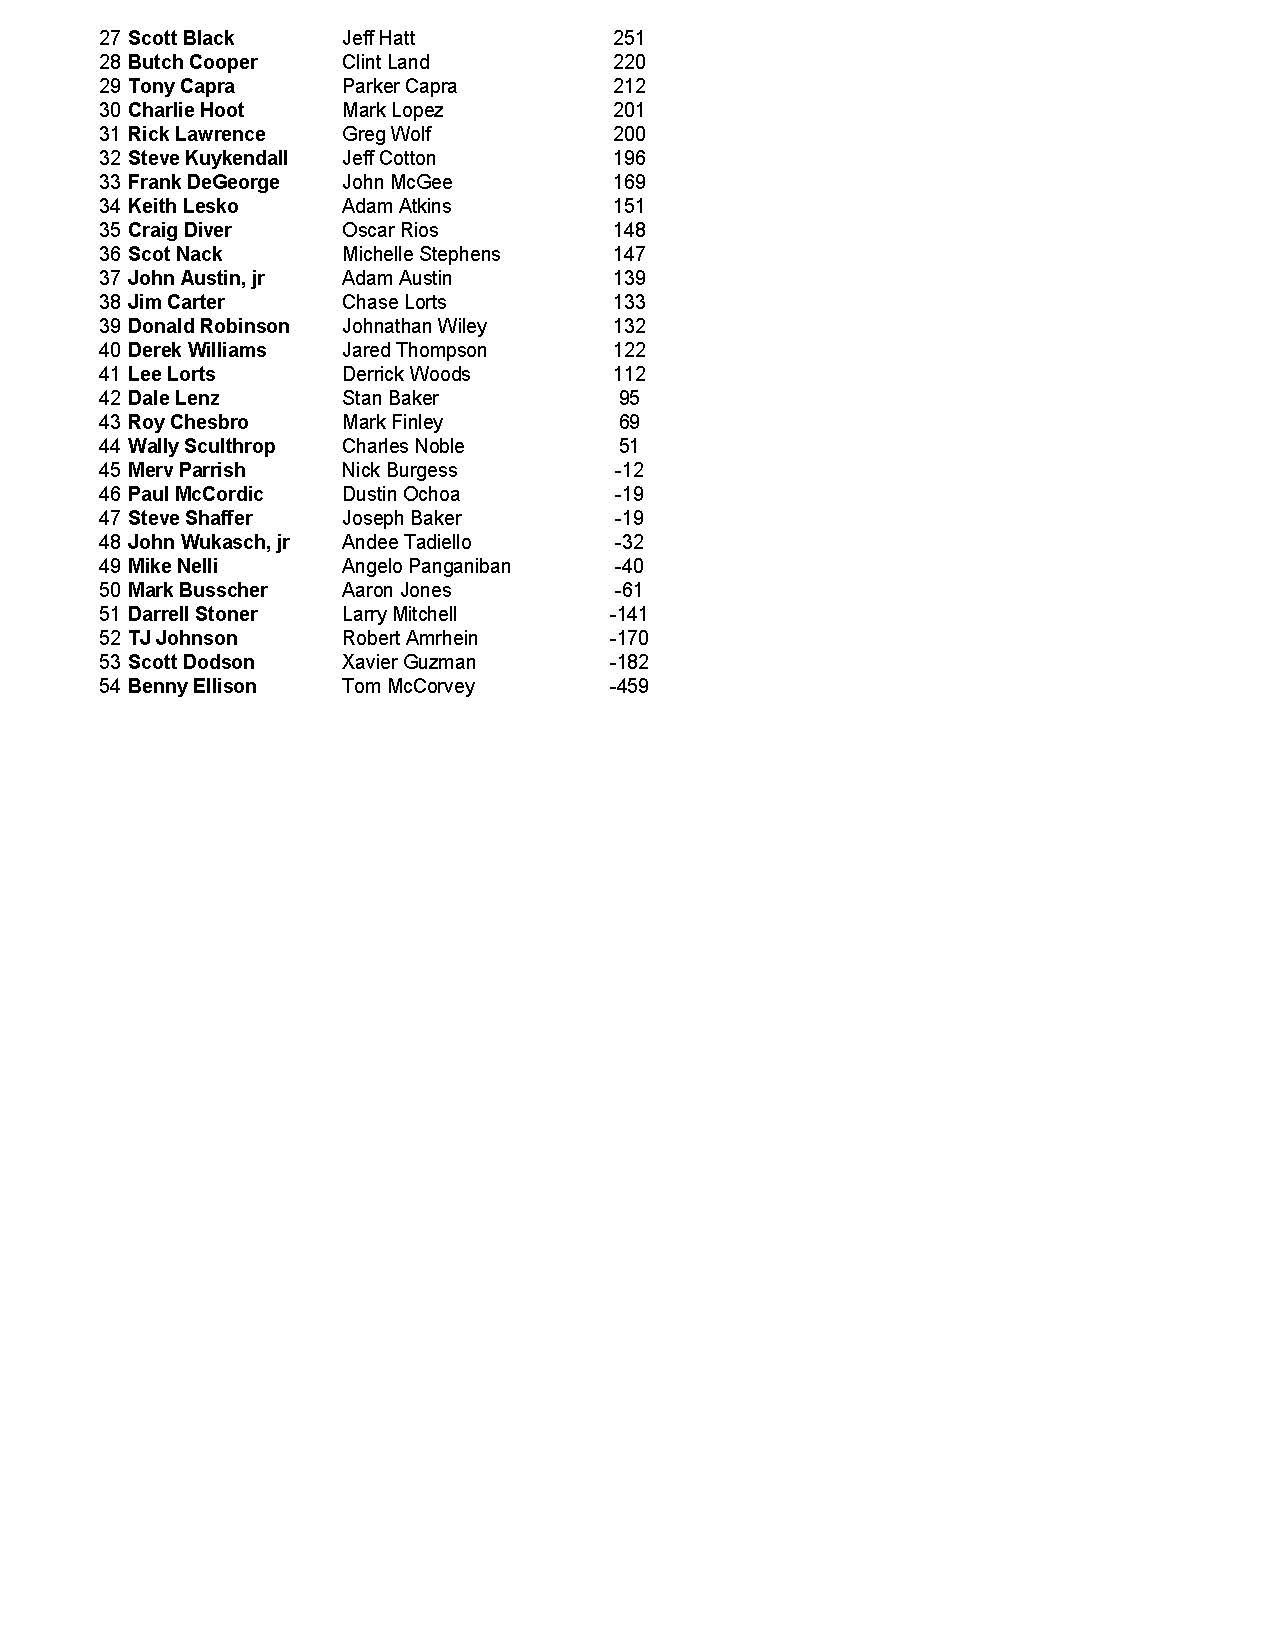 05292022results_Page_2